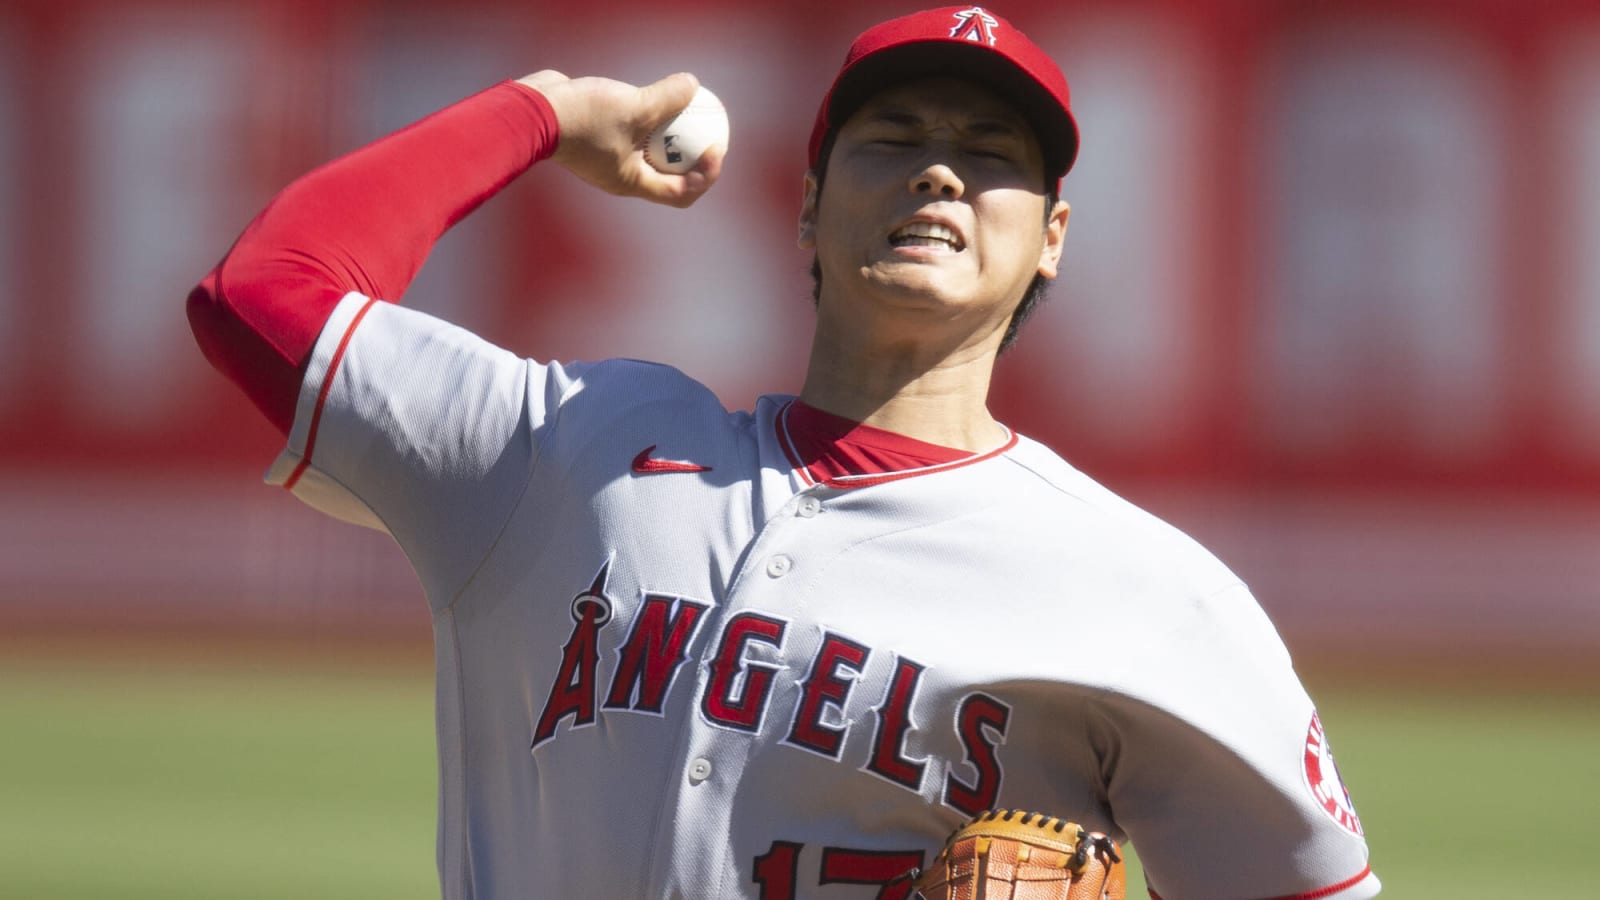 2022 Los Angeles Angels Player Reviews: Shohei Ohtani